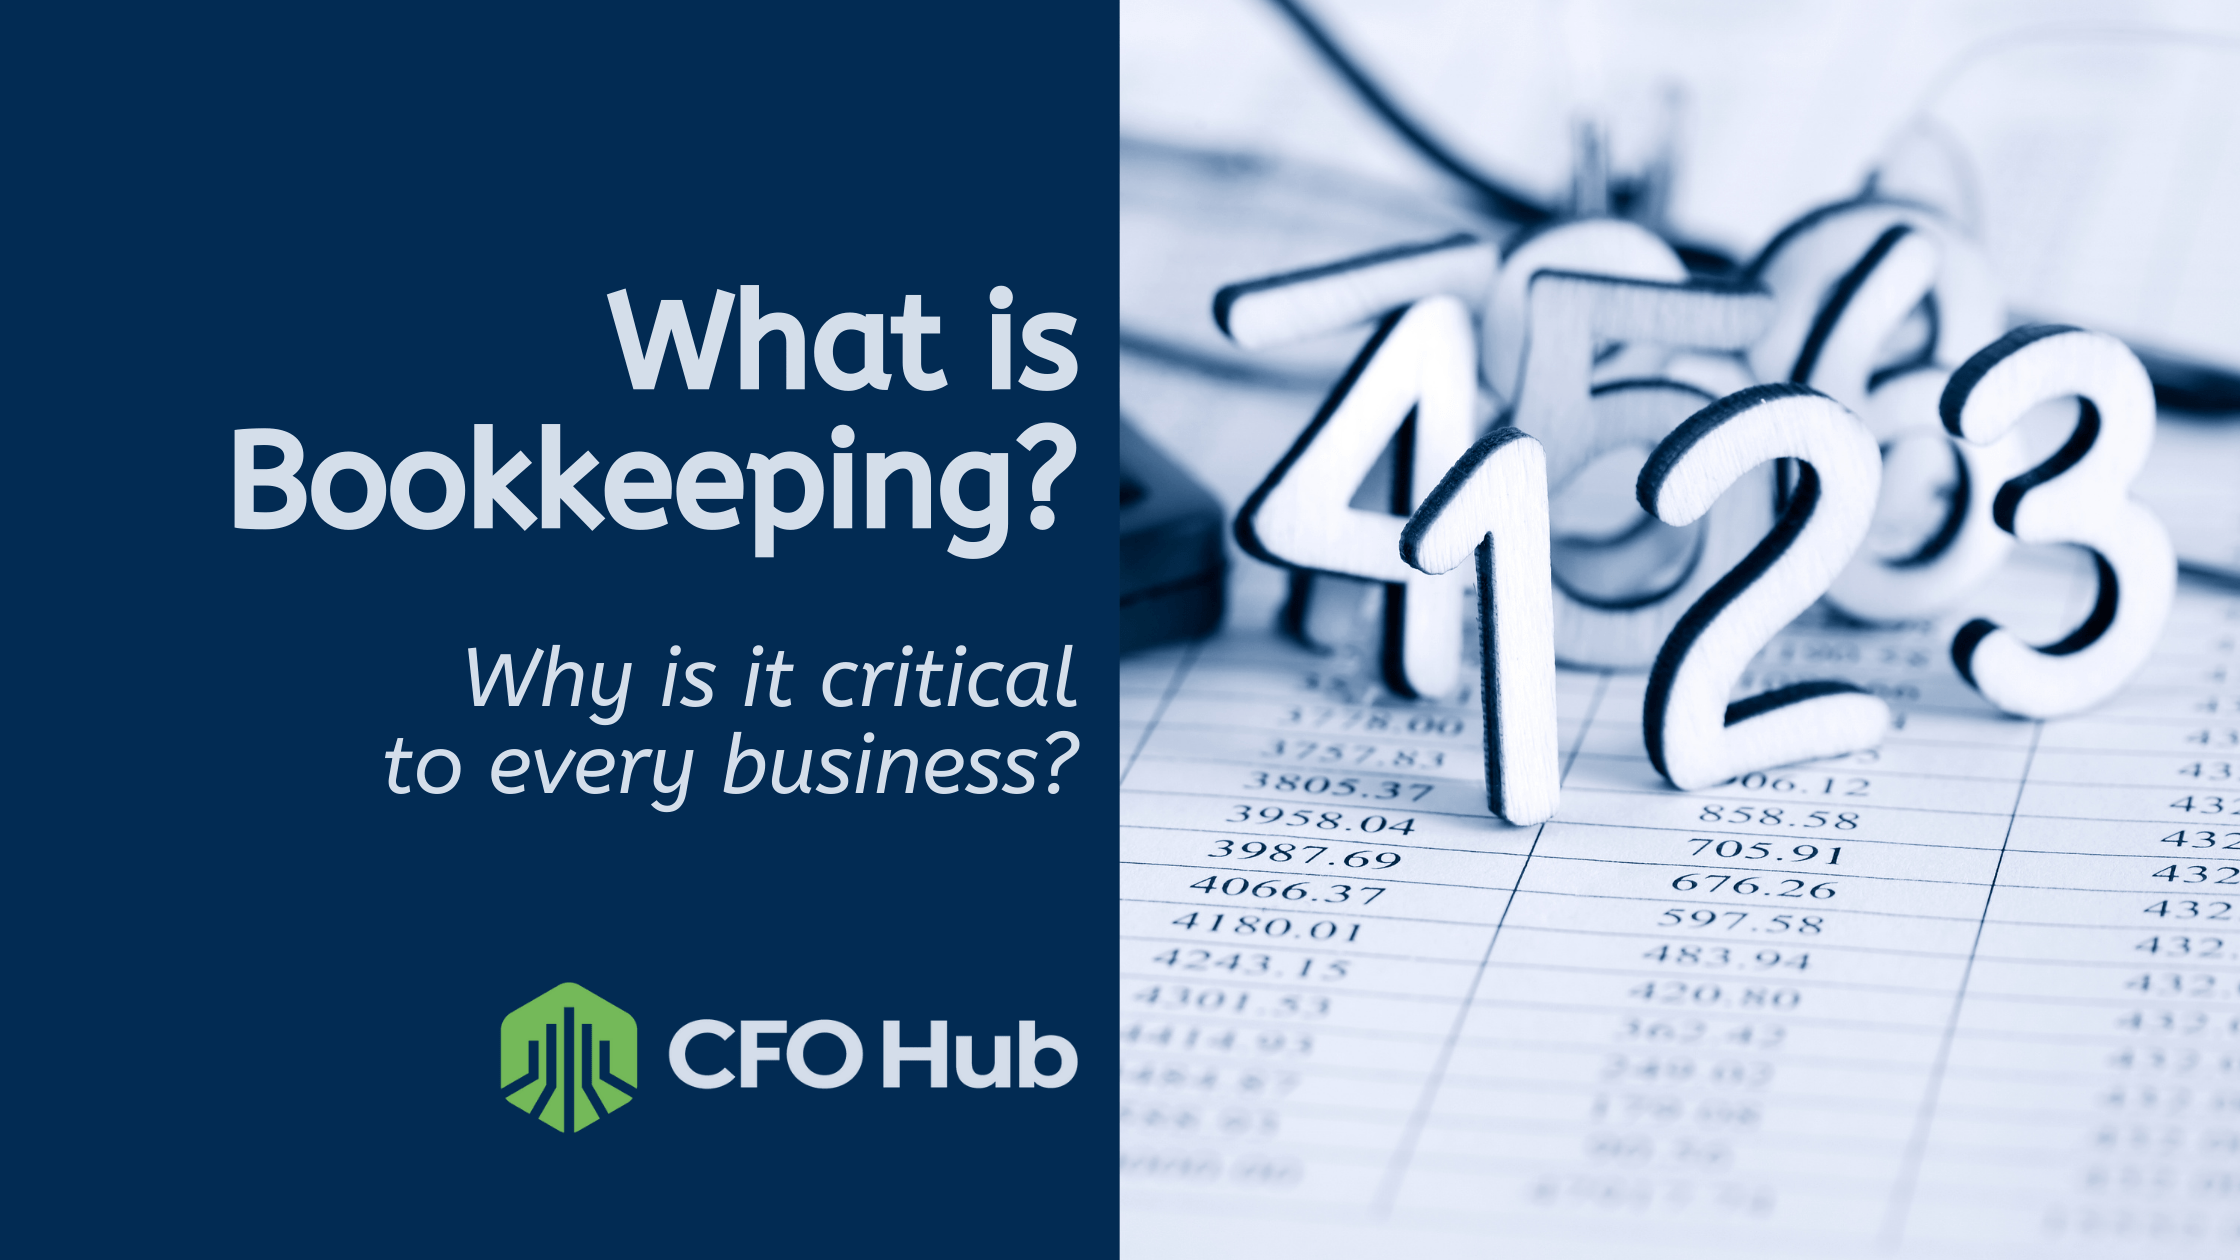 What is Bookkeeping? Why is it critical to every business?